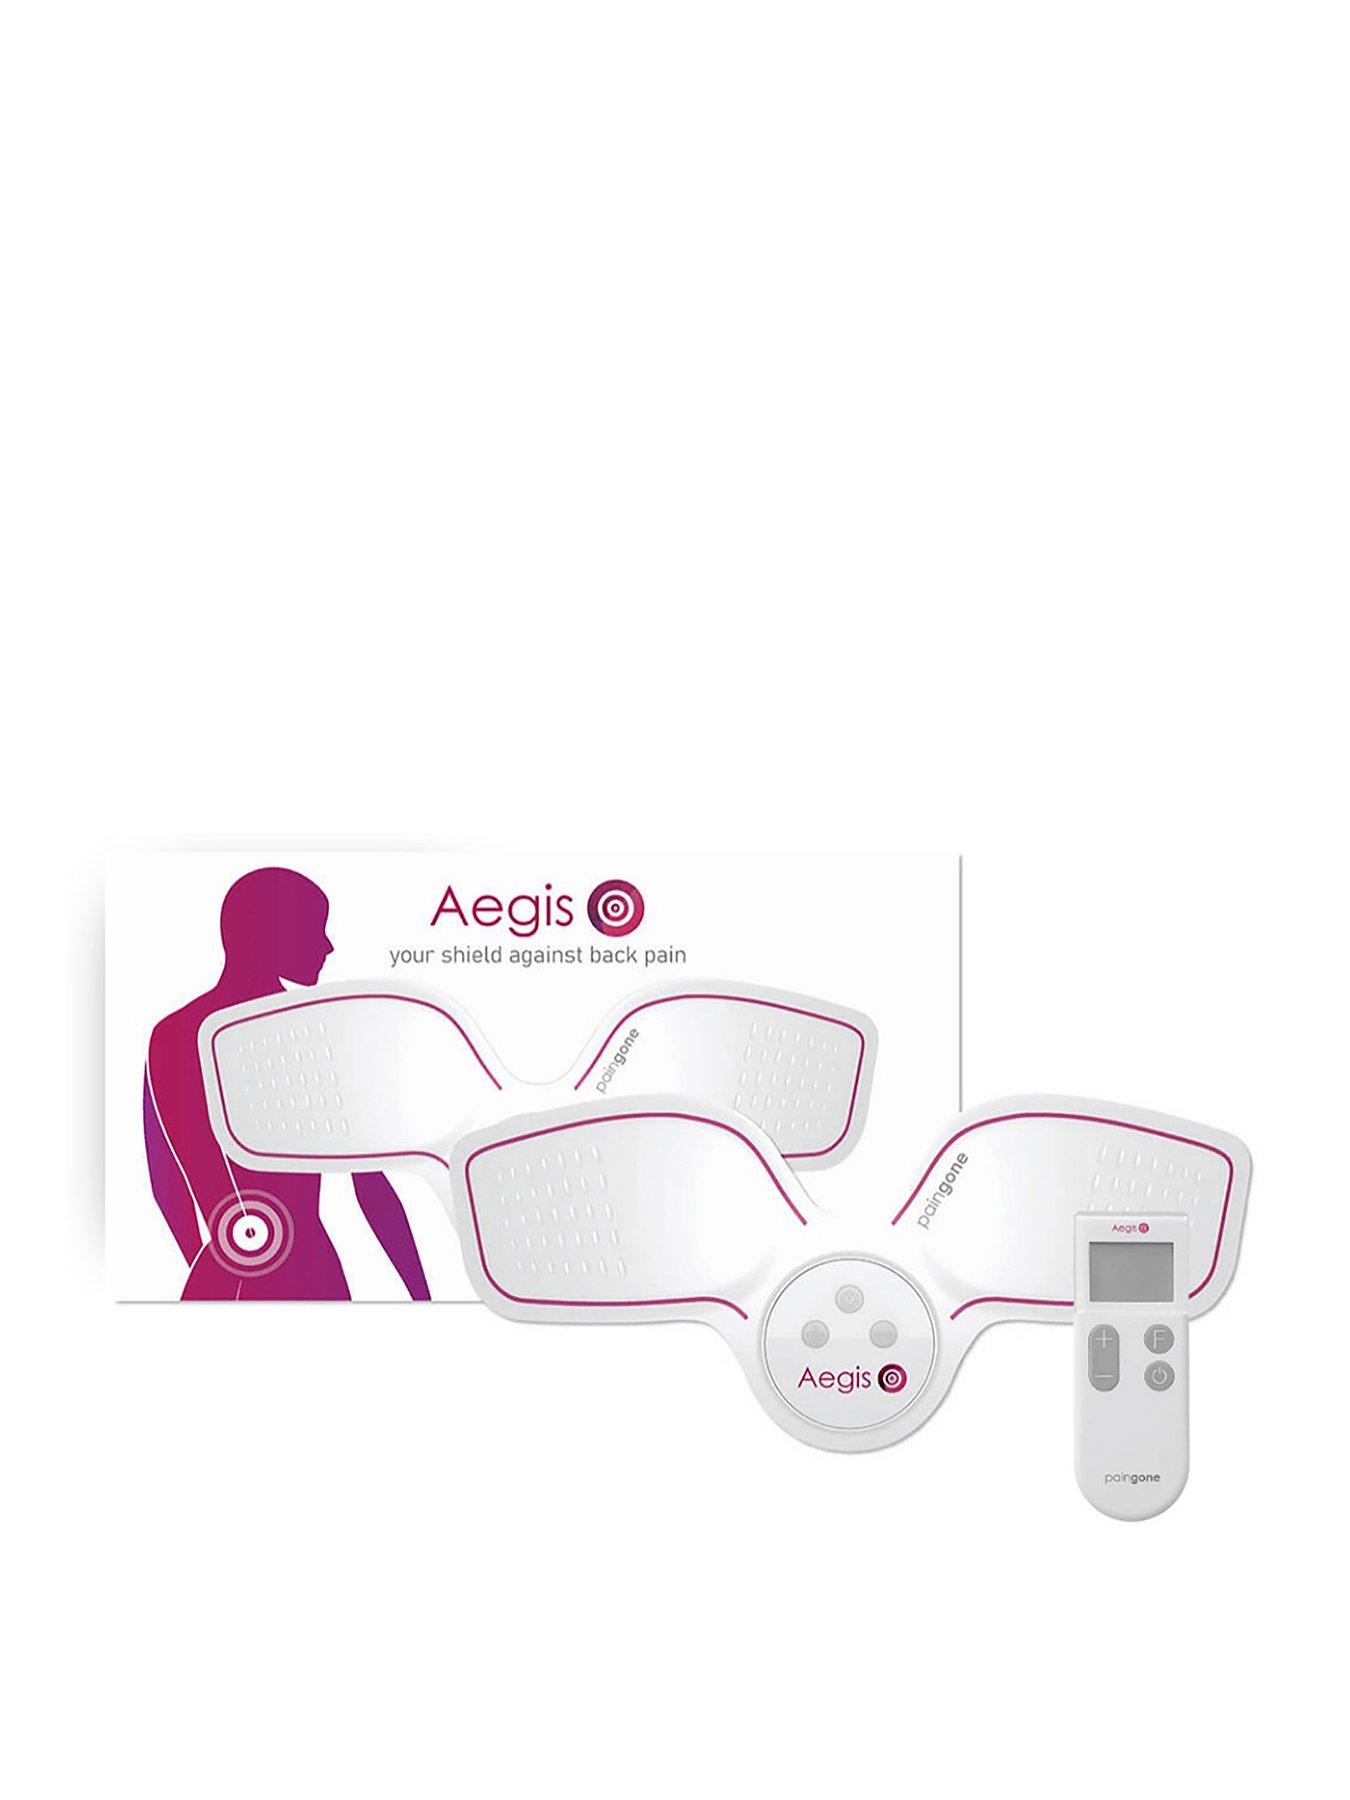 Paingone Aegis Wireless TENS Back Pain Relief Device | Your Shield Against  Back Pain | Wearable TENS Unit Muscle Stimulator for Back Pain Relief